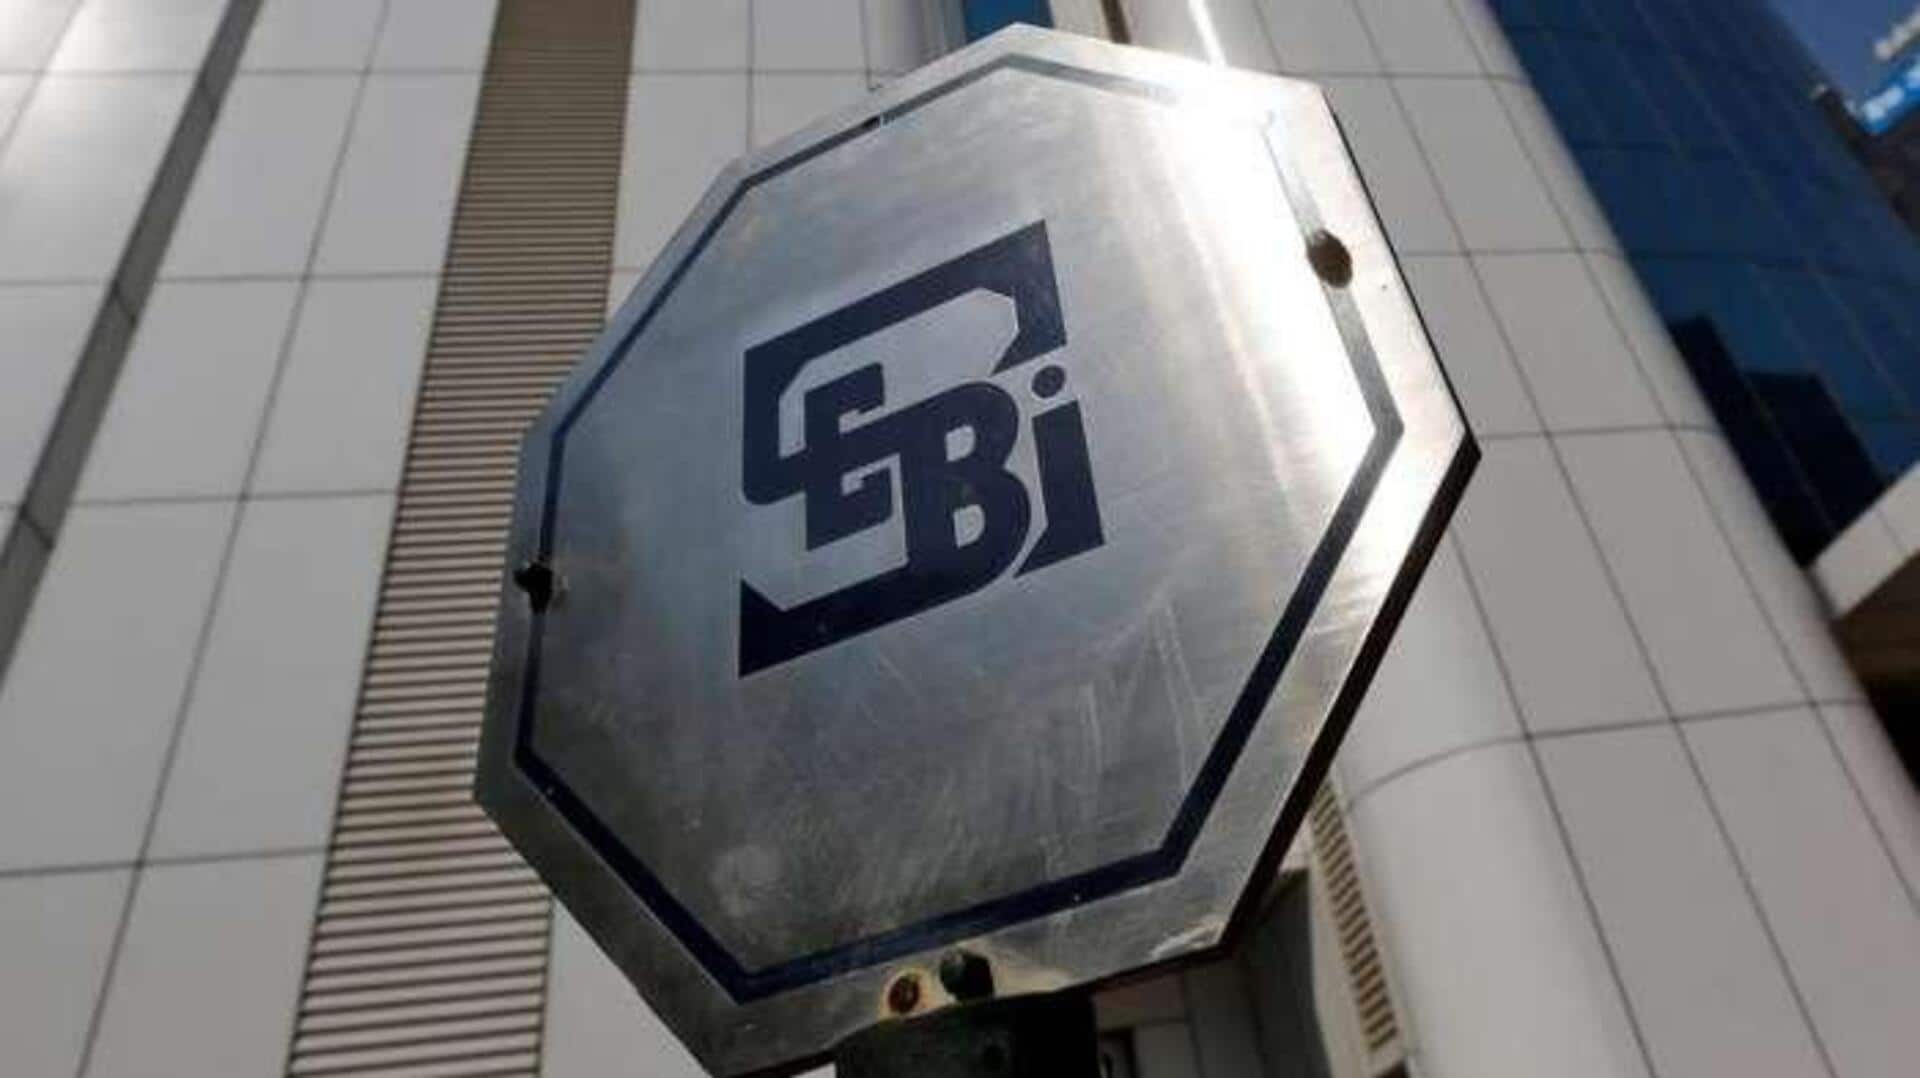 SEBI directs Religare to seek approvals for Burman family's offer